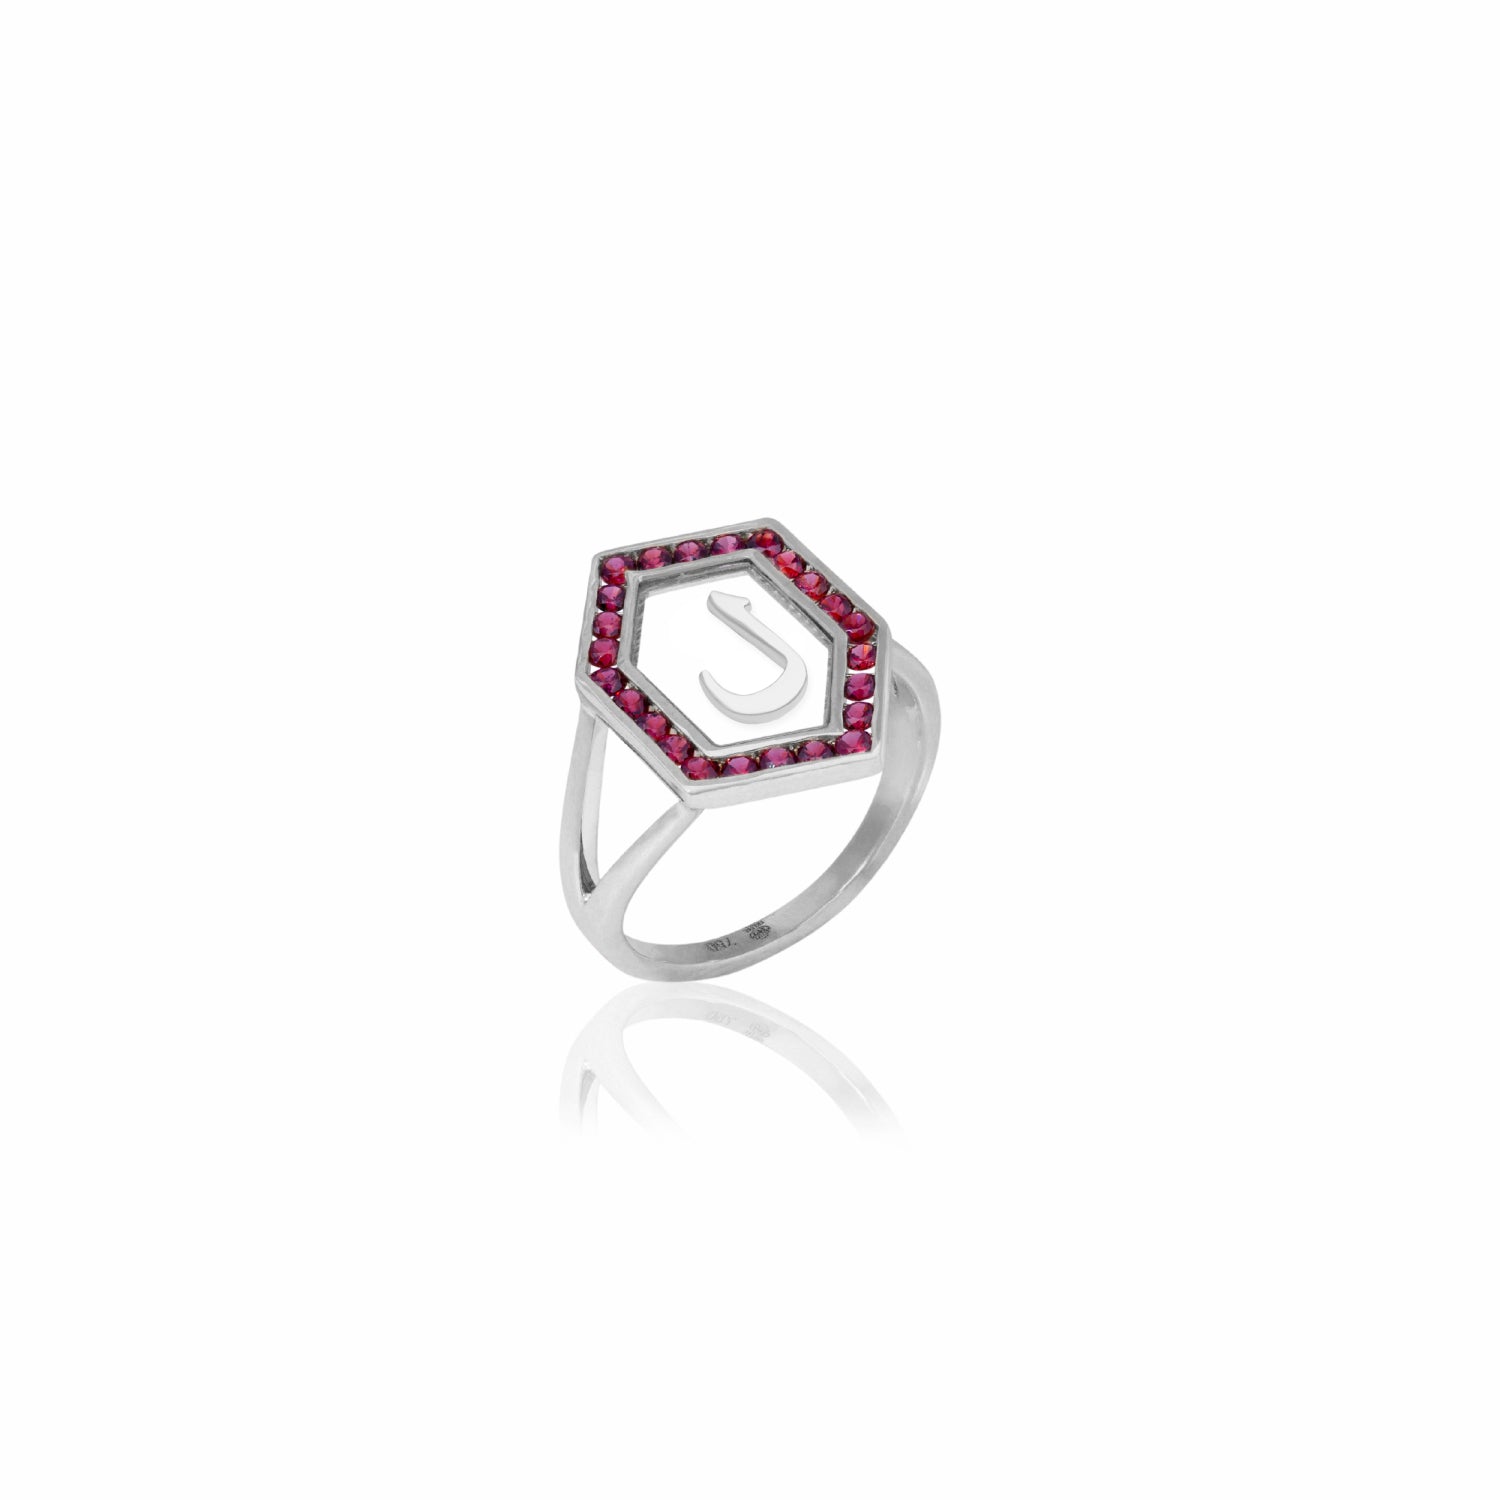 Qamoos 1.0 Letter ل Ruby Ring in White Gold